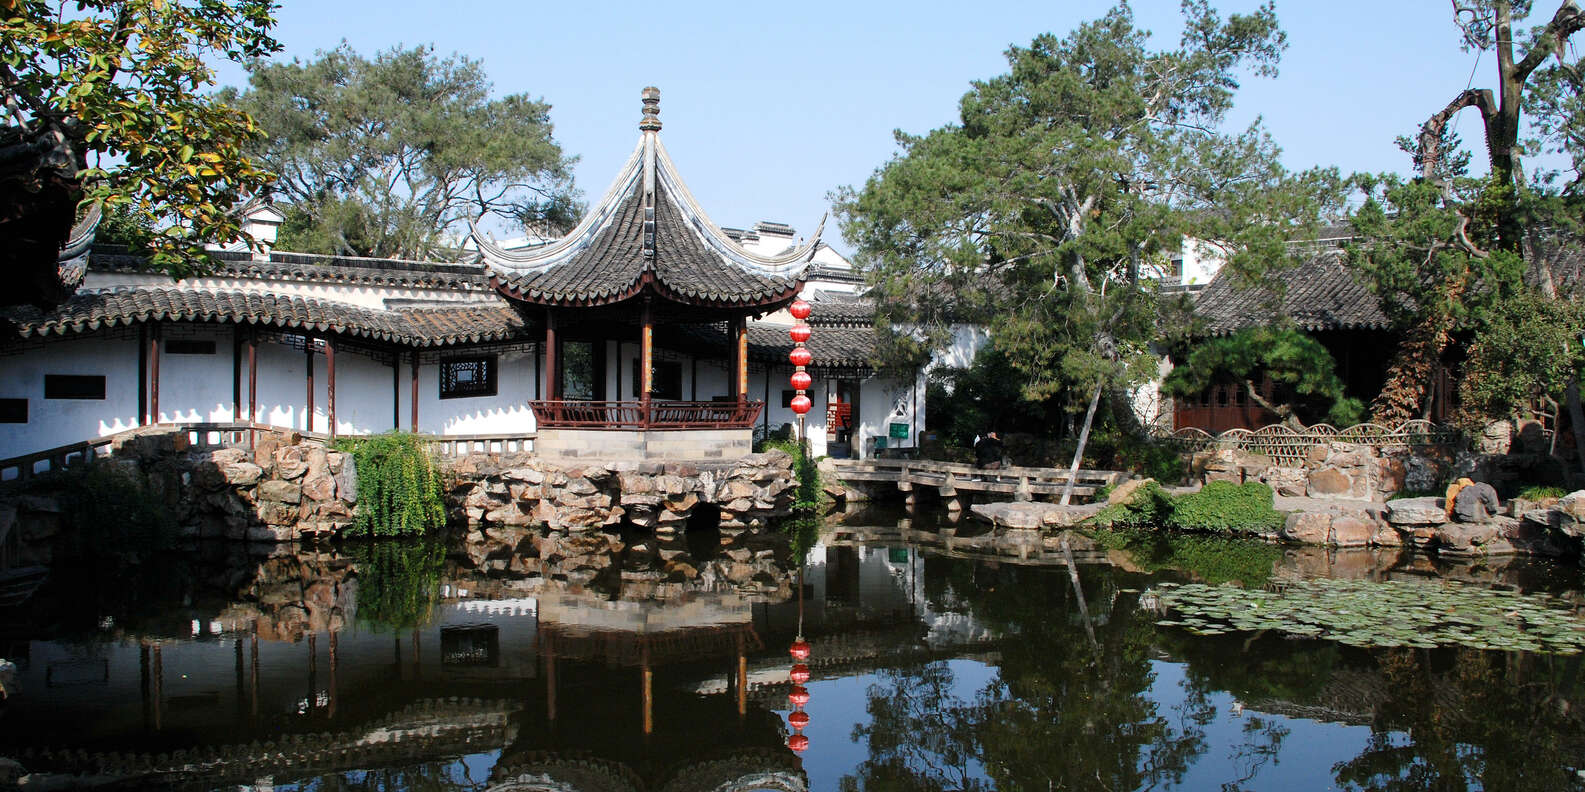 What to do in Suzhou